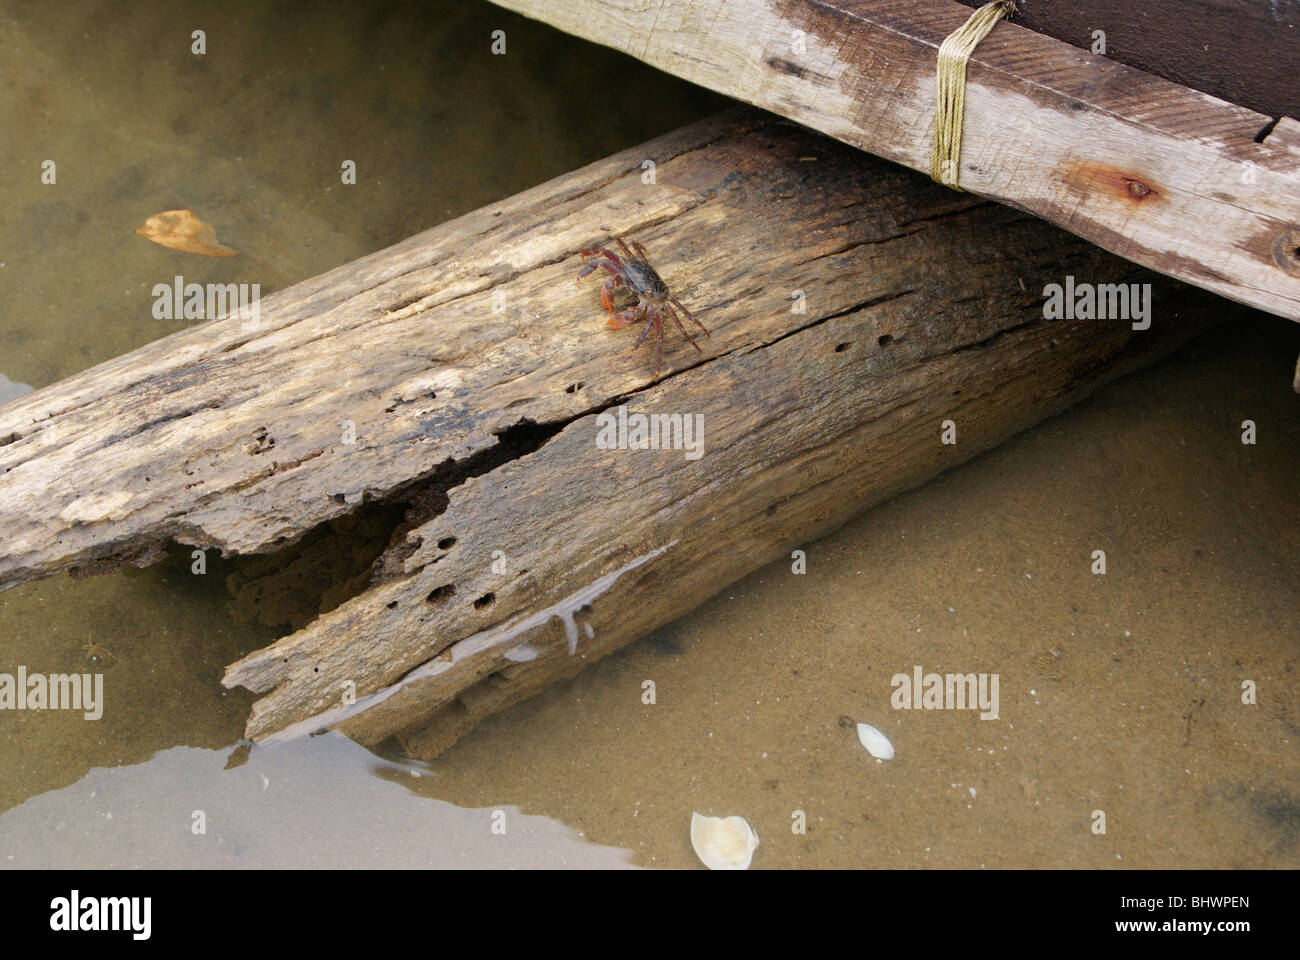 Crab in a Wooden piece of Wood at Lake Water.scene from backwaters of Kerala,India Stock Photo